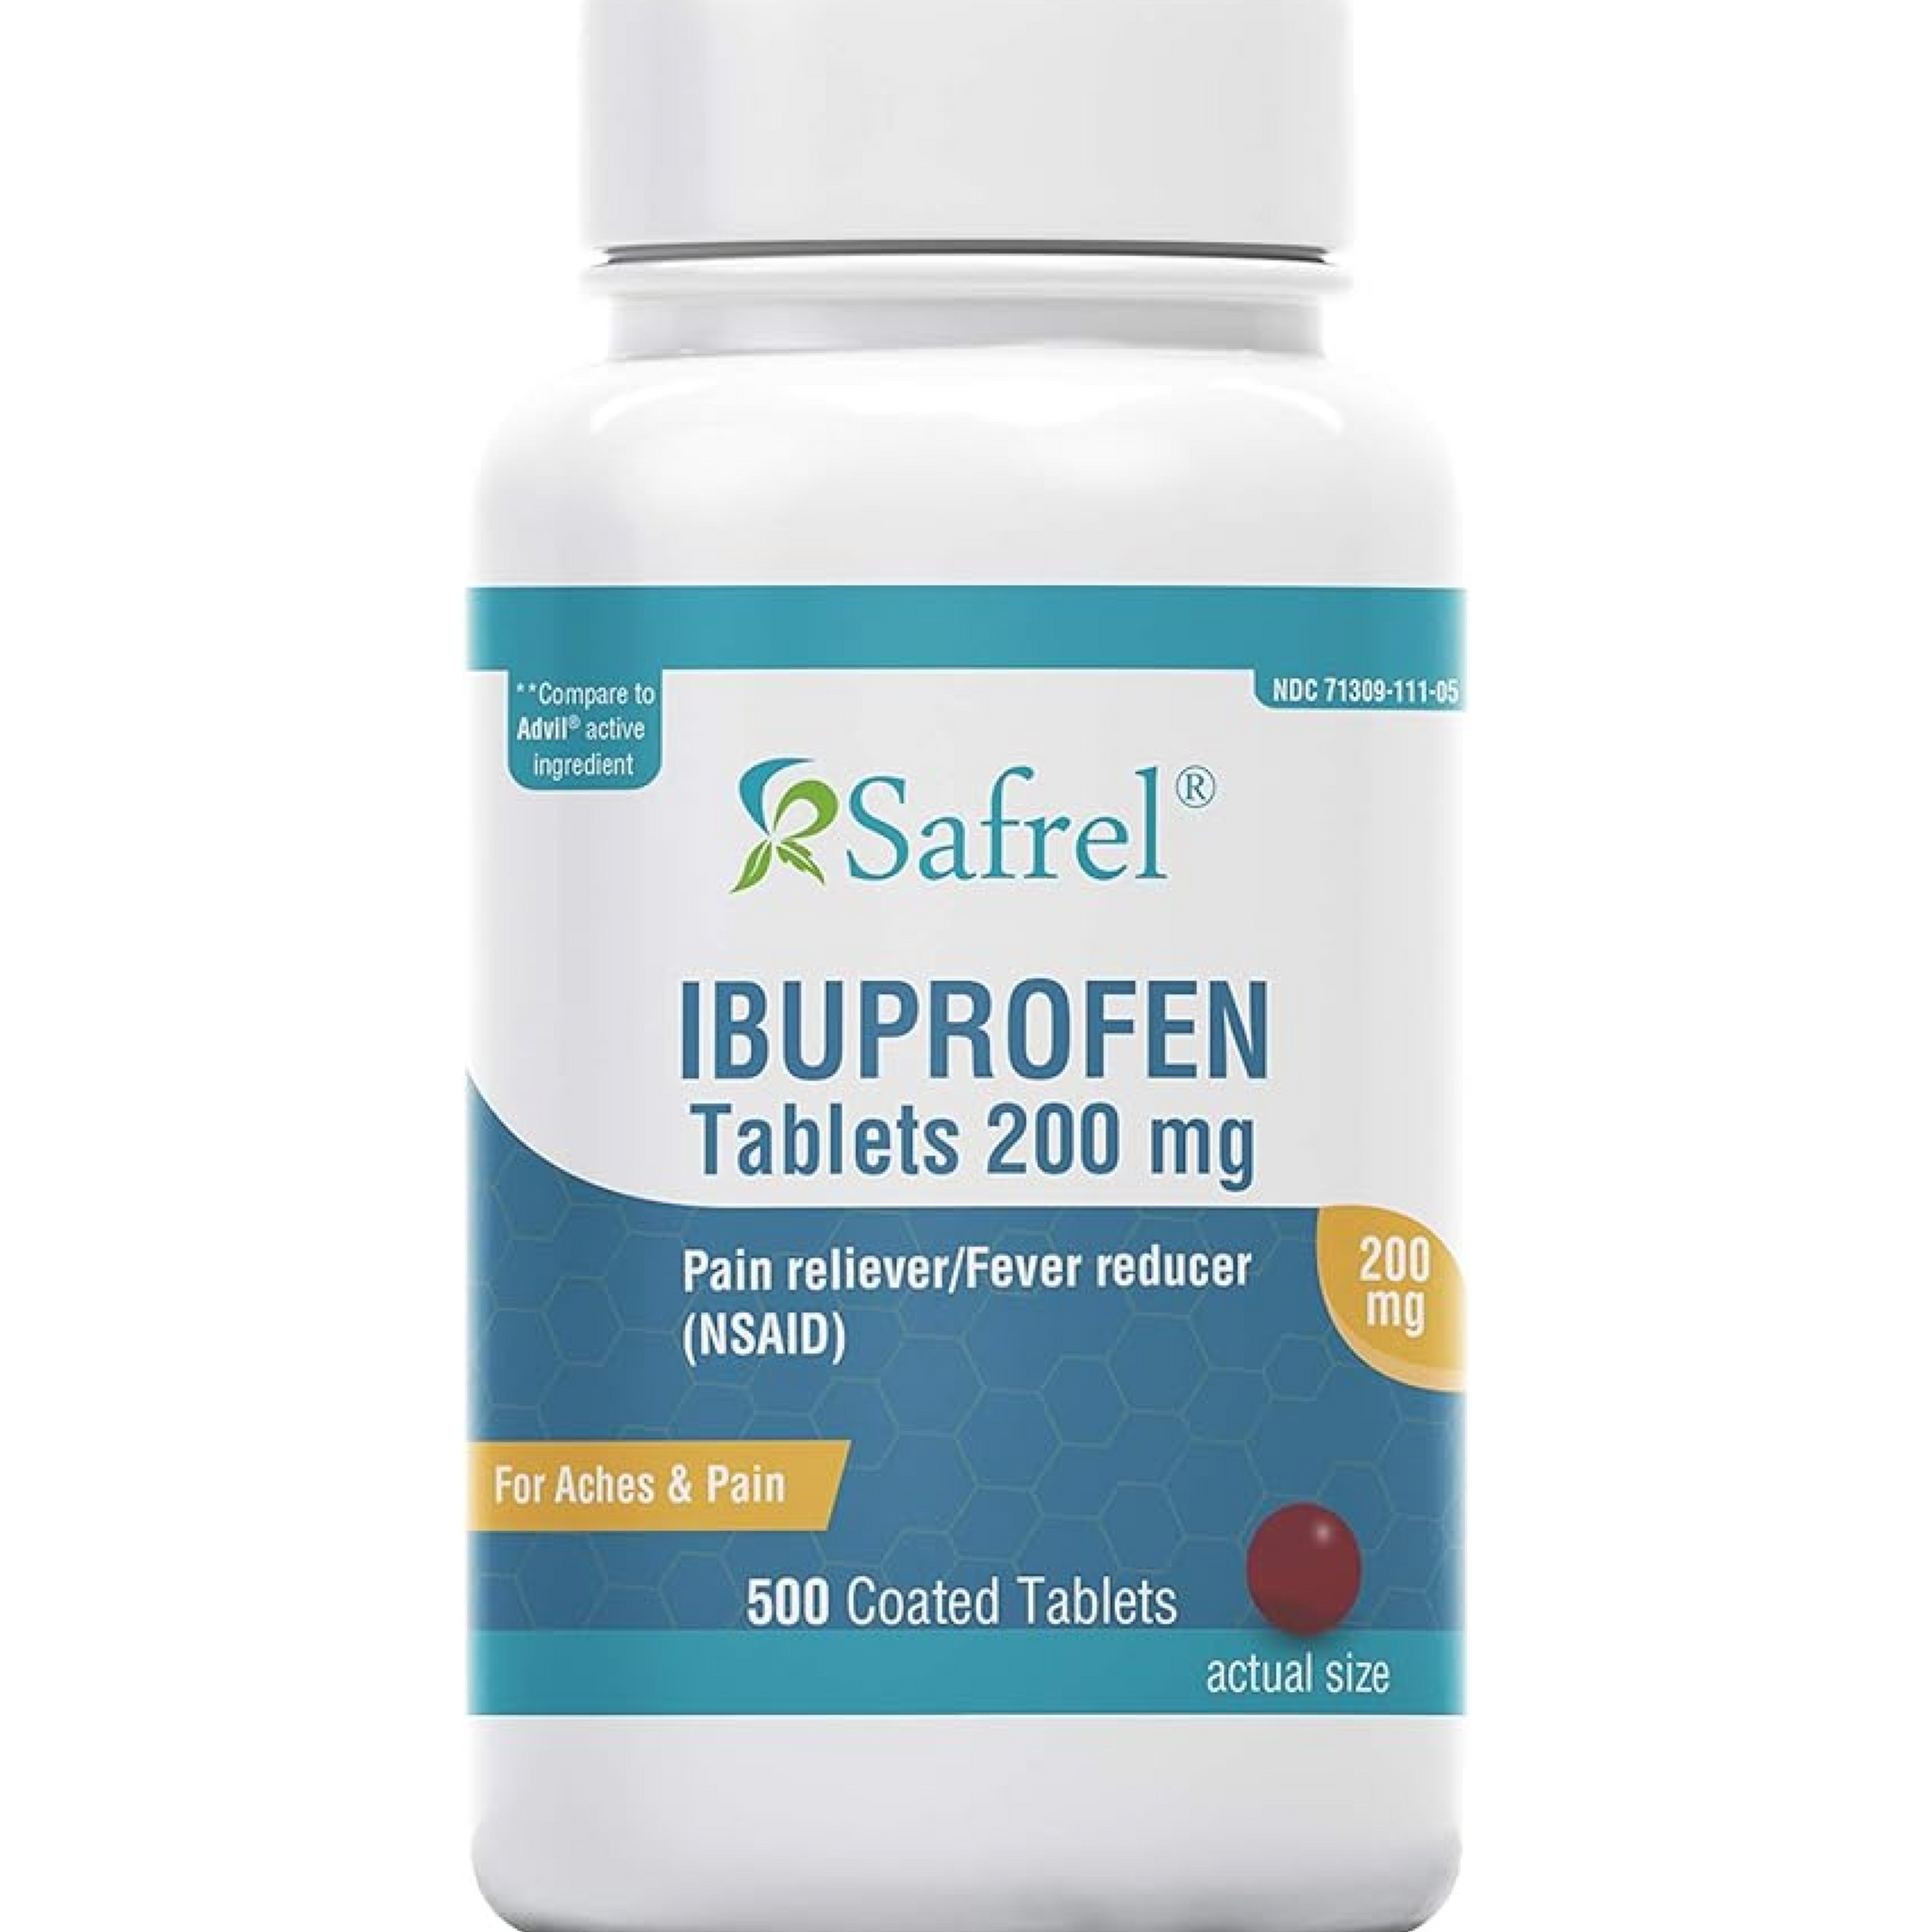 Safrel Ibuprofen Tablets 200 mg (NSAID), 500 Count, Pain Reliever/Fever Reducer | Toothache, Headache, Muscle Aches, Menstrual Cramps, Back & Arthritis Pain Relief | Value Pack